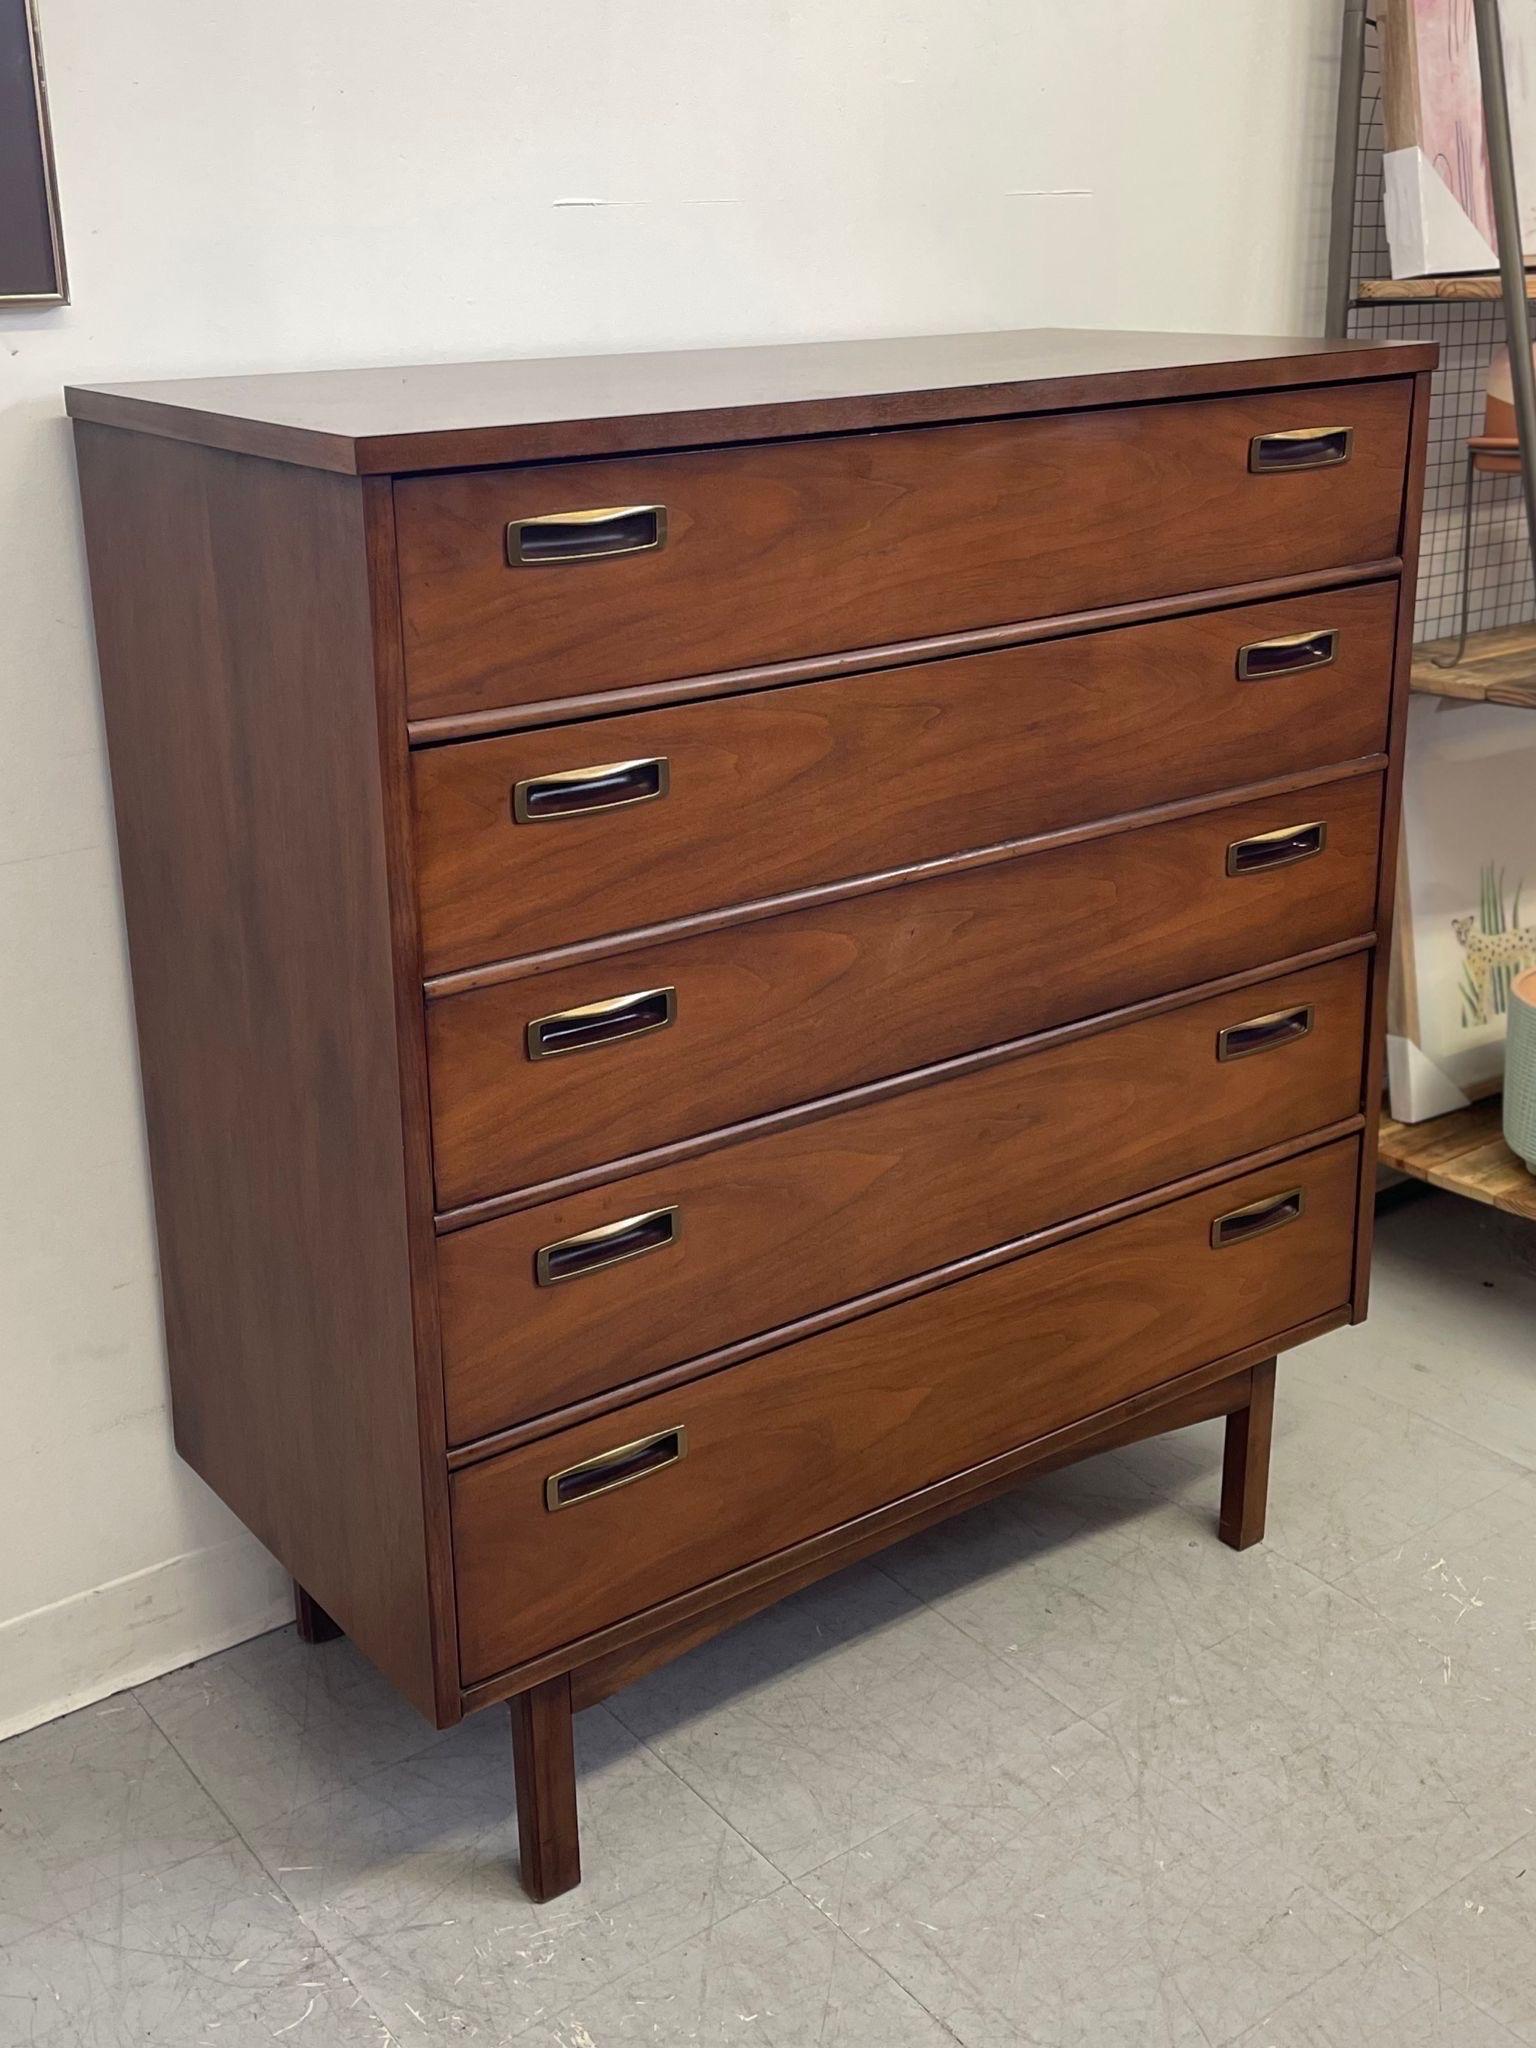 Vintage Walnut Toned Mid Century Modern Four Drawer Dresser In Good Condition For Sale In Seattle, WA